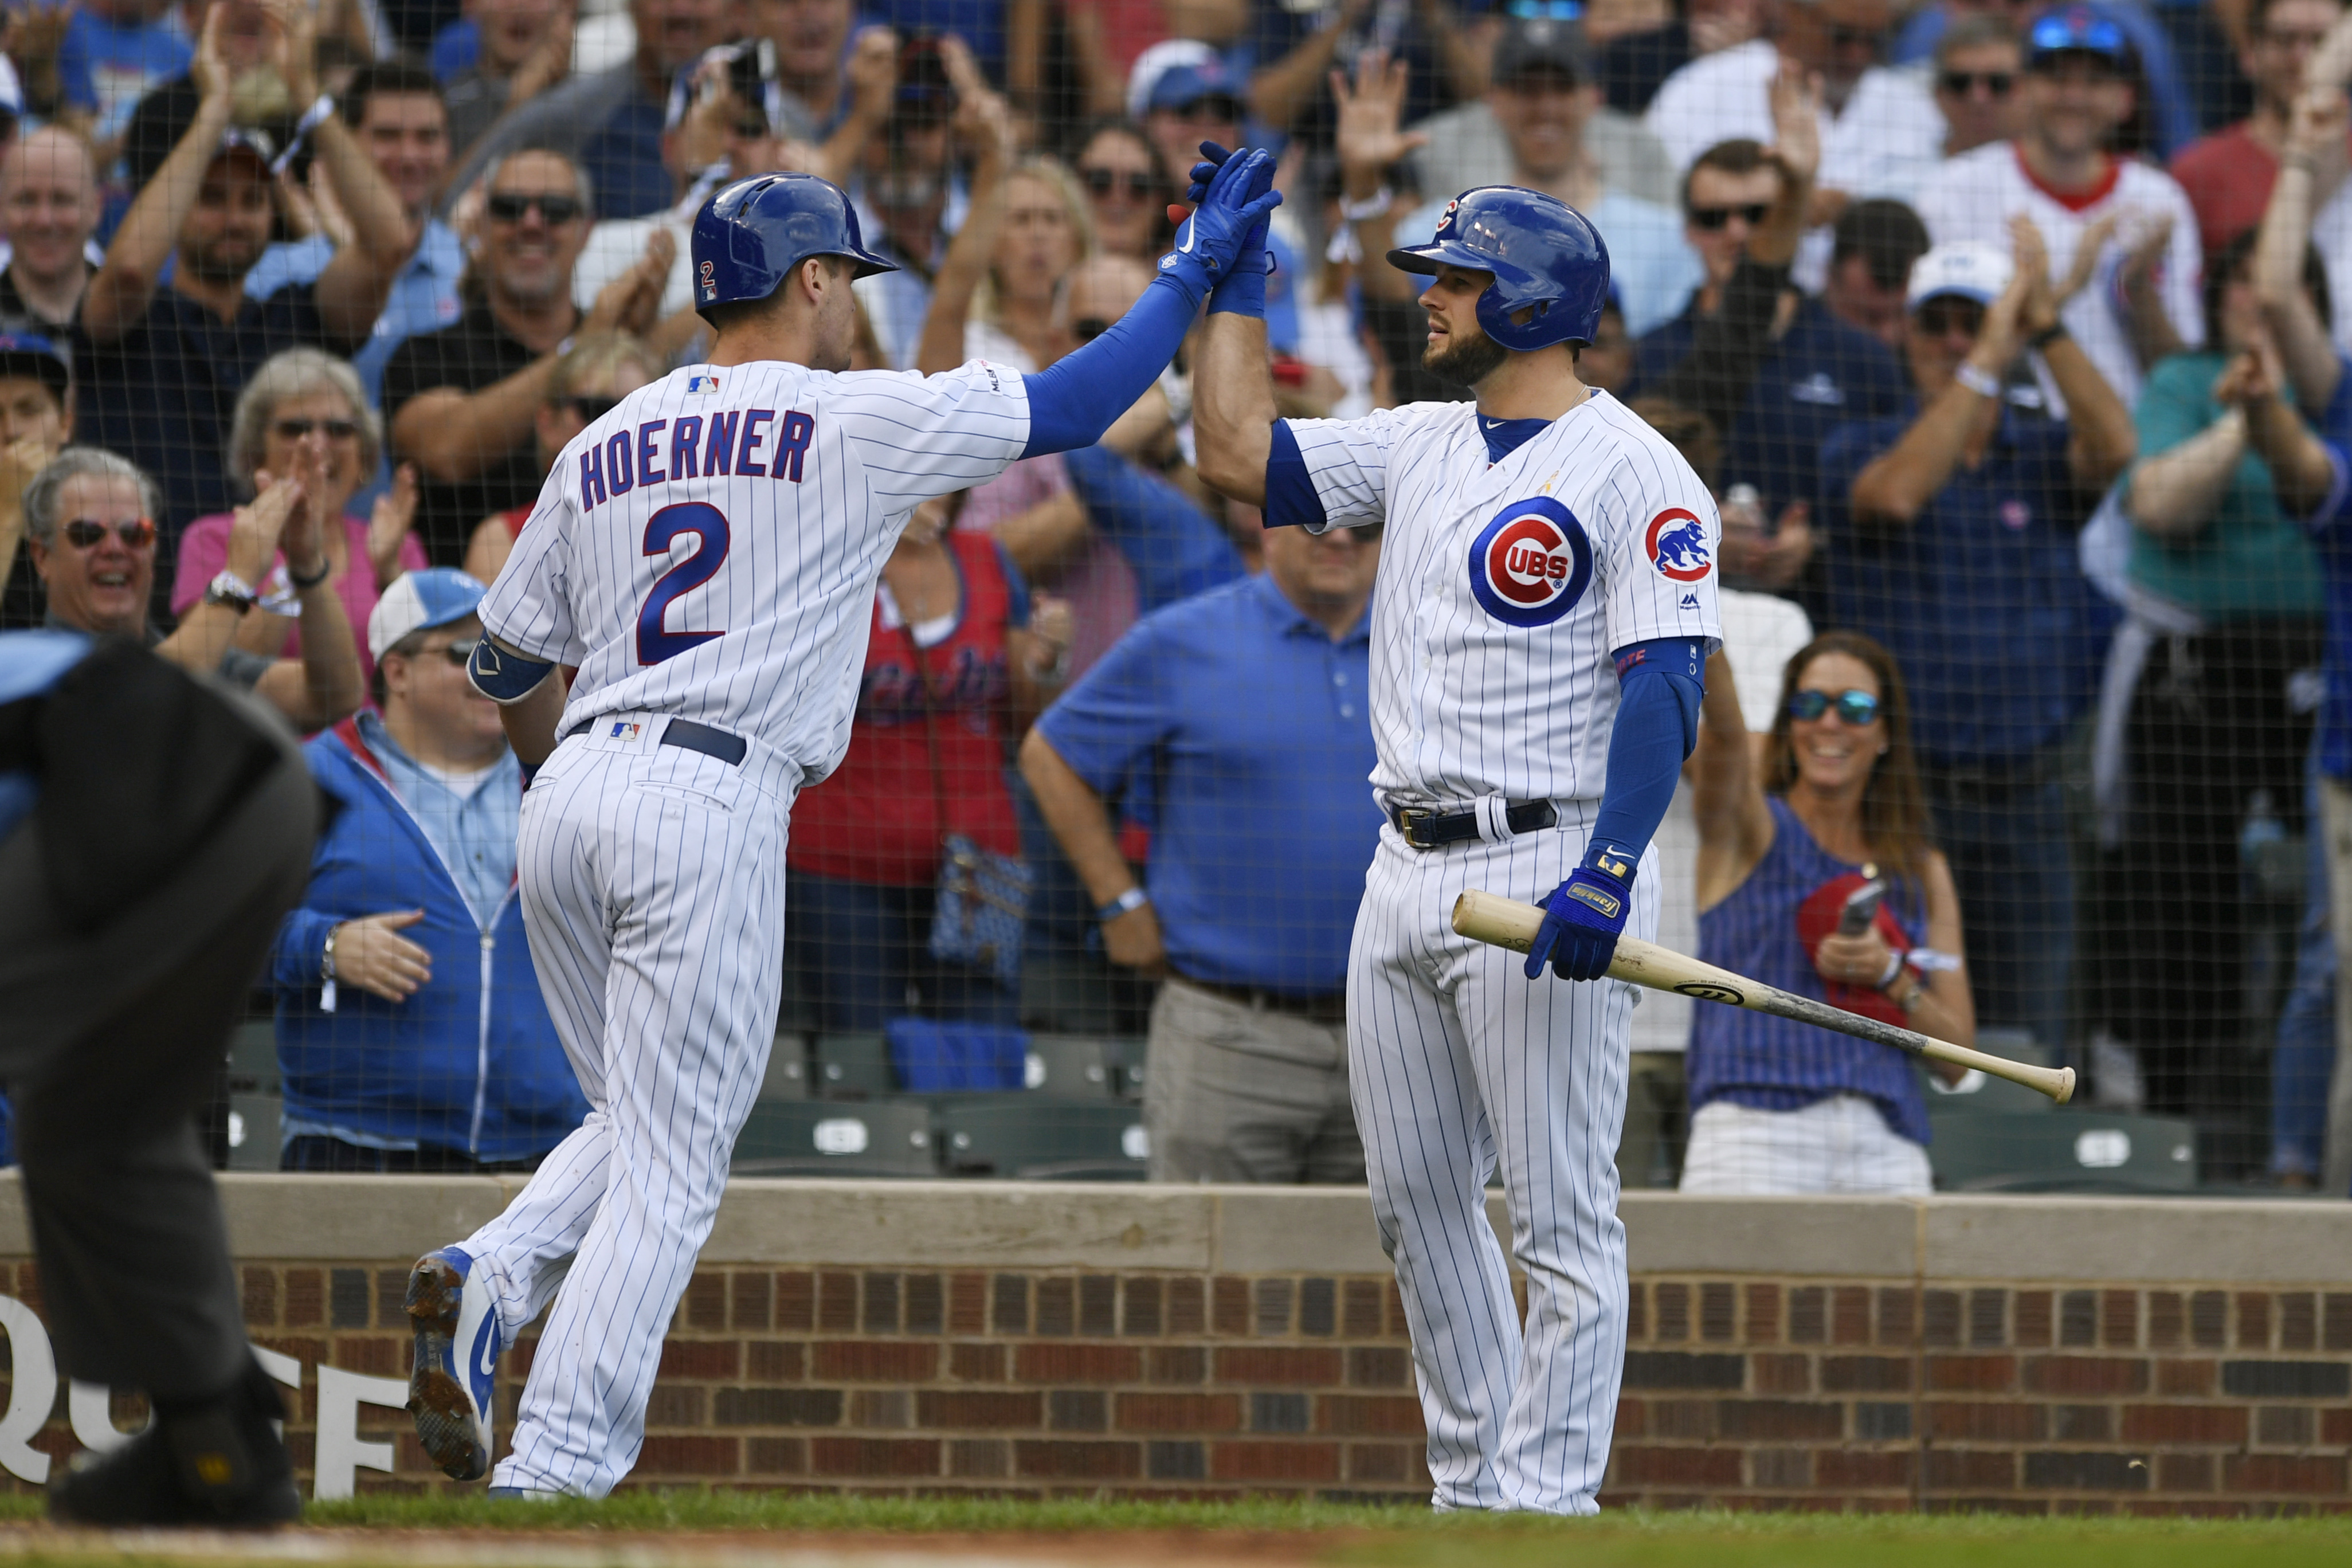 Miami Marlins vs. Chicago Cubs: Anthony Rizzo homer leads to